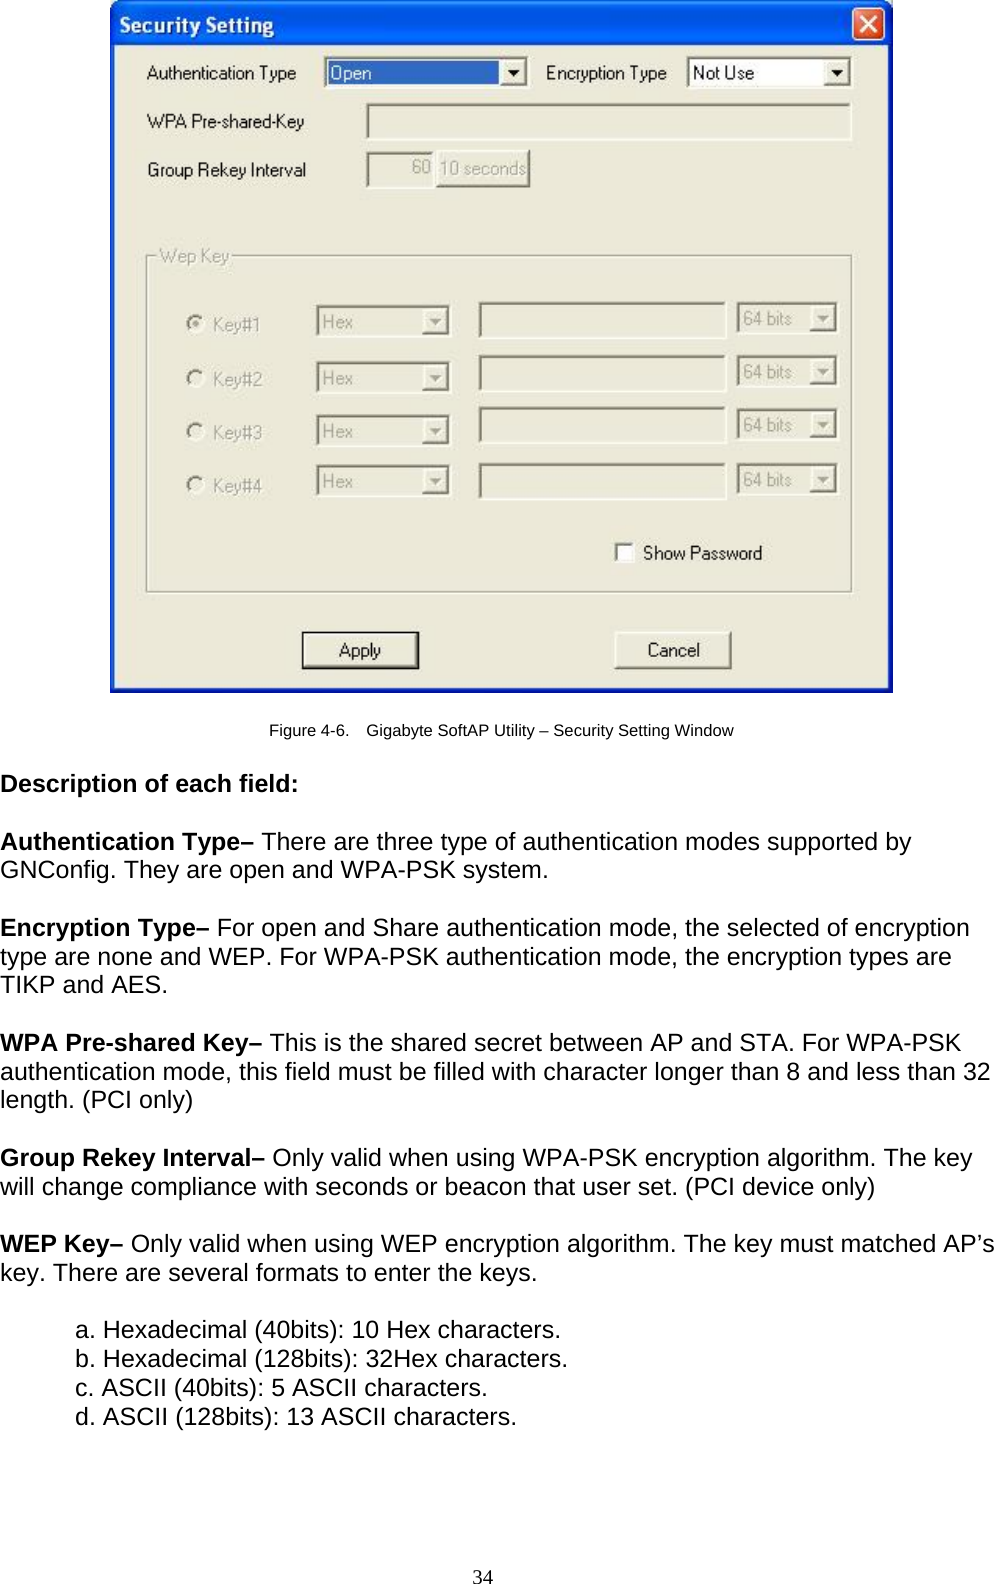 34     Figure 4-6.    Gigabyte SoftAP Utility – Security Setting Window  Description of each field:  Authentication Type– There are three type of authentication modes supported by GNConfig. They are open and WPA-PSK system.  Encryption Type– For open and Share authentication mode, the selected of encryption type are none and WEP. For WPA-PSK authentication mode, the encryption types are TIKP and AES.  WPA Pre-shared Key– This is the shared secret between AP and STA. For WPA-PSK authentication mode, this field must be filled with character longer than 8 and less than 32 length. (PCI only)  Group Rekey Interval– Only valid when using WPA-PSK encryption algorithm. The key will change compliance with seconds or beacon that user set. (PCI device only)  WEP Key– Only valid when using WEP encryption algorithm. The key must matched AP’s key. There are several formats to enter the keys.  a. Hexadecimal (40bits): 10 Hex characters. b. Hexadecimal (128bits): 32Hex characters. c. ASCII (40bits): 5 ASCII characters. d. ASCII (128bits): 13 ASCII characters.    